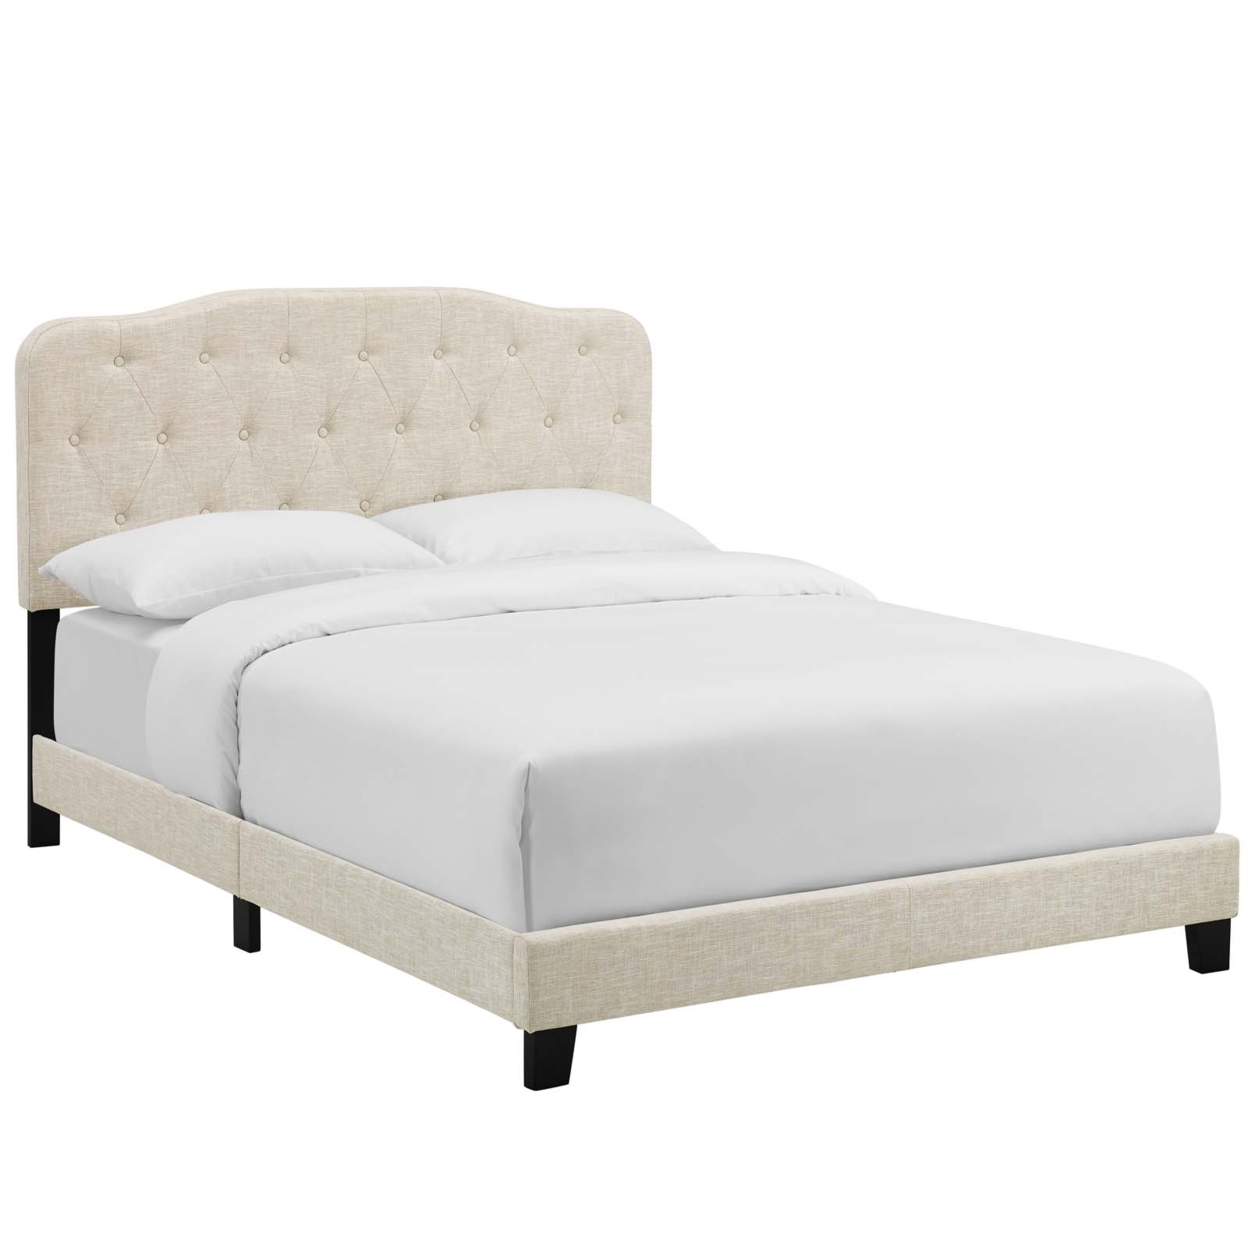 Amelia Full Upholstered Fabric Bed, Beige